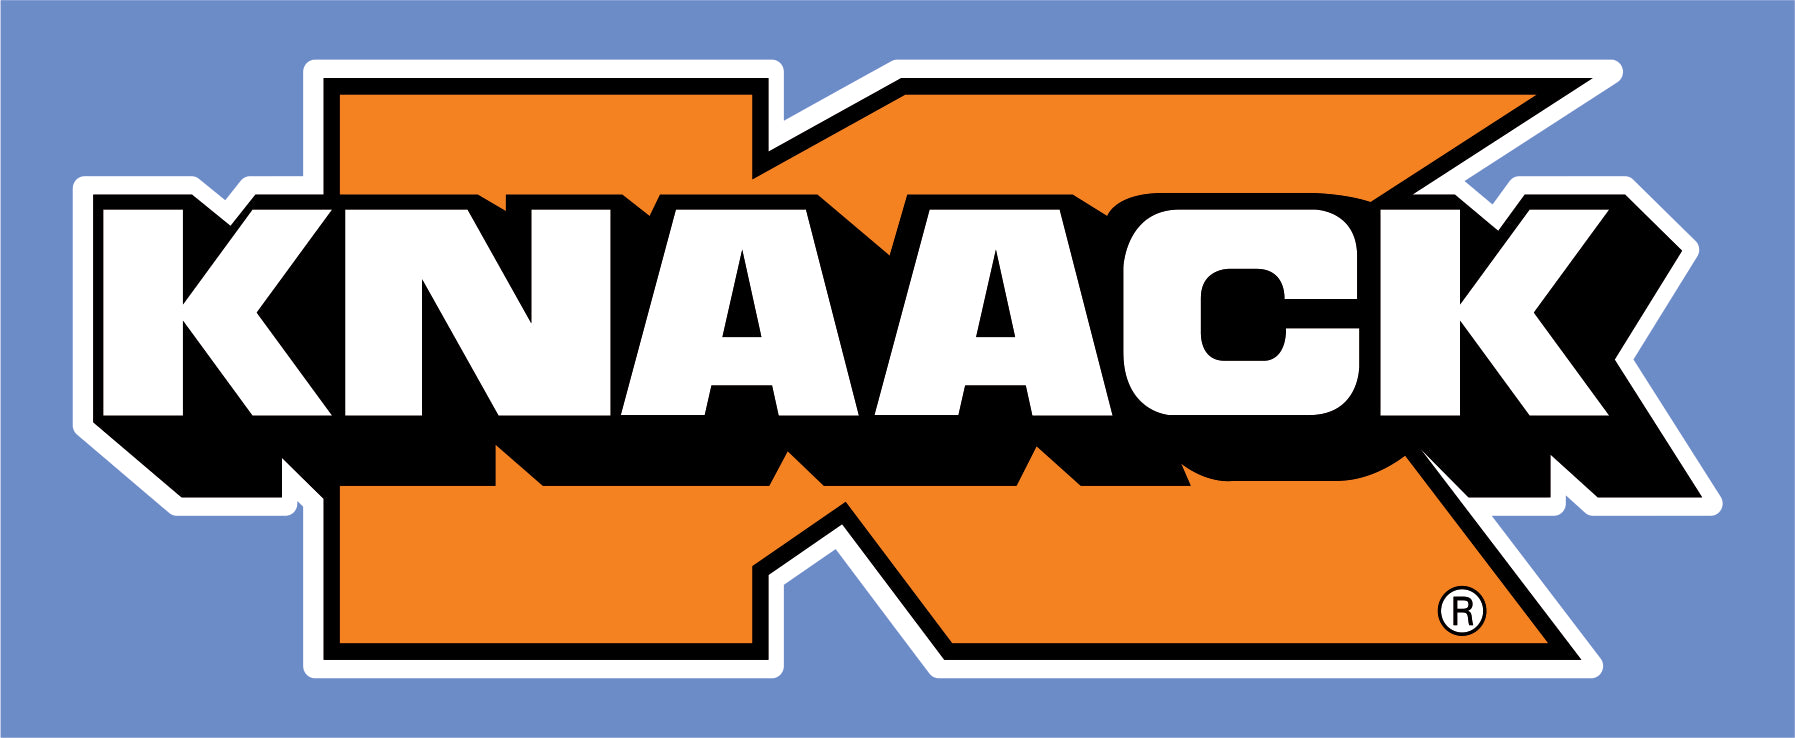 Knaack Tool Chest Logo Decal Sticker Choose Size 3M LAMINATED